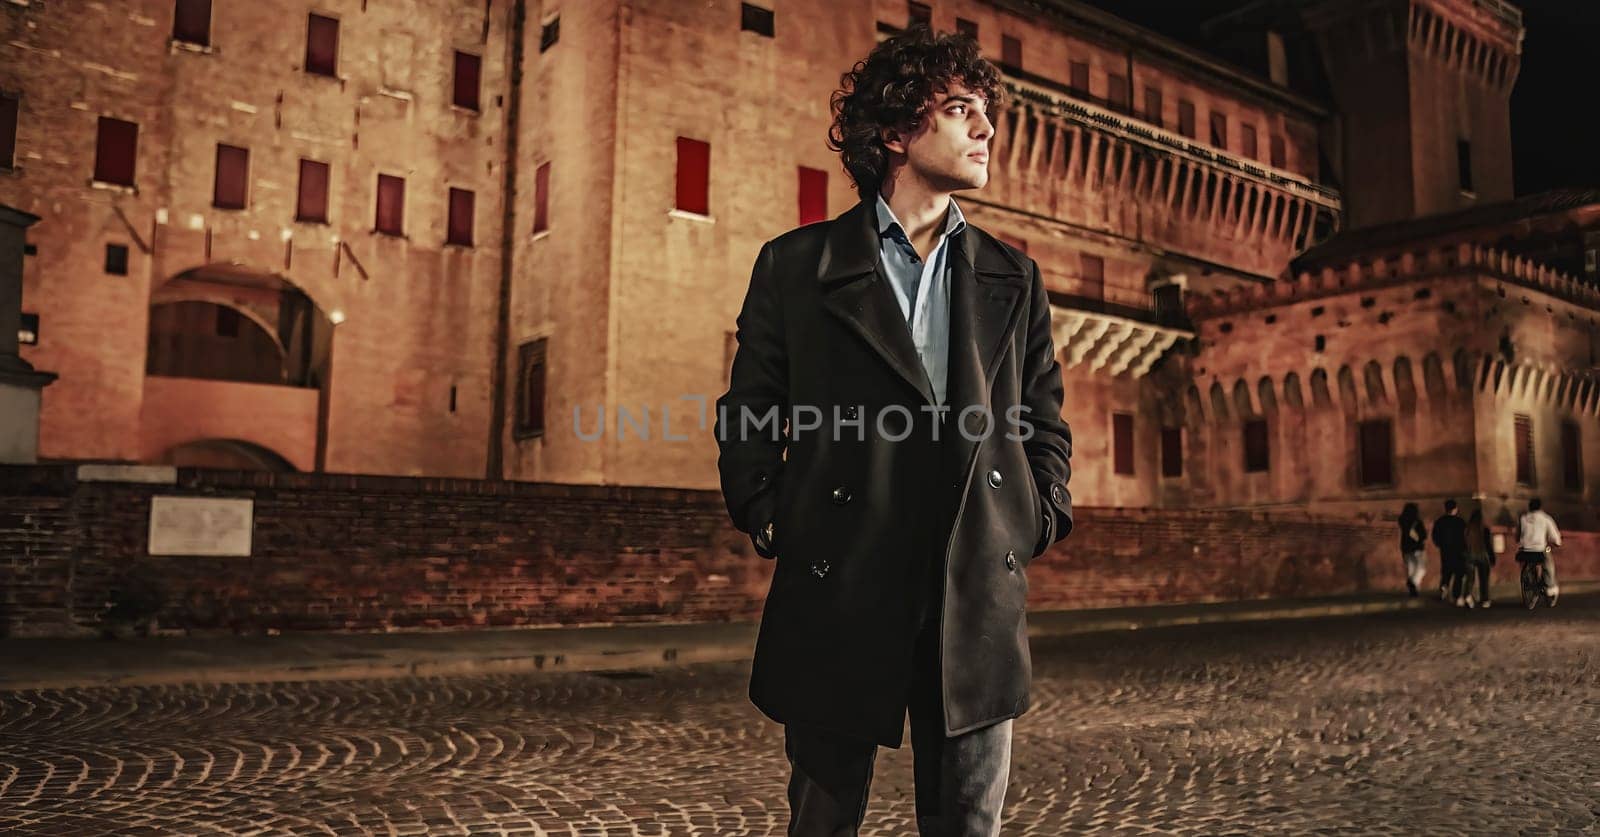 A lone figure in a long coat gazes thoughtfully at the bustling cityscape under the cover of darkness.